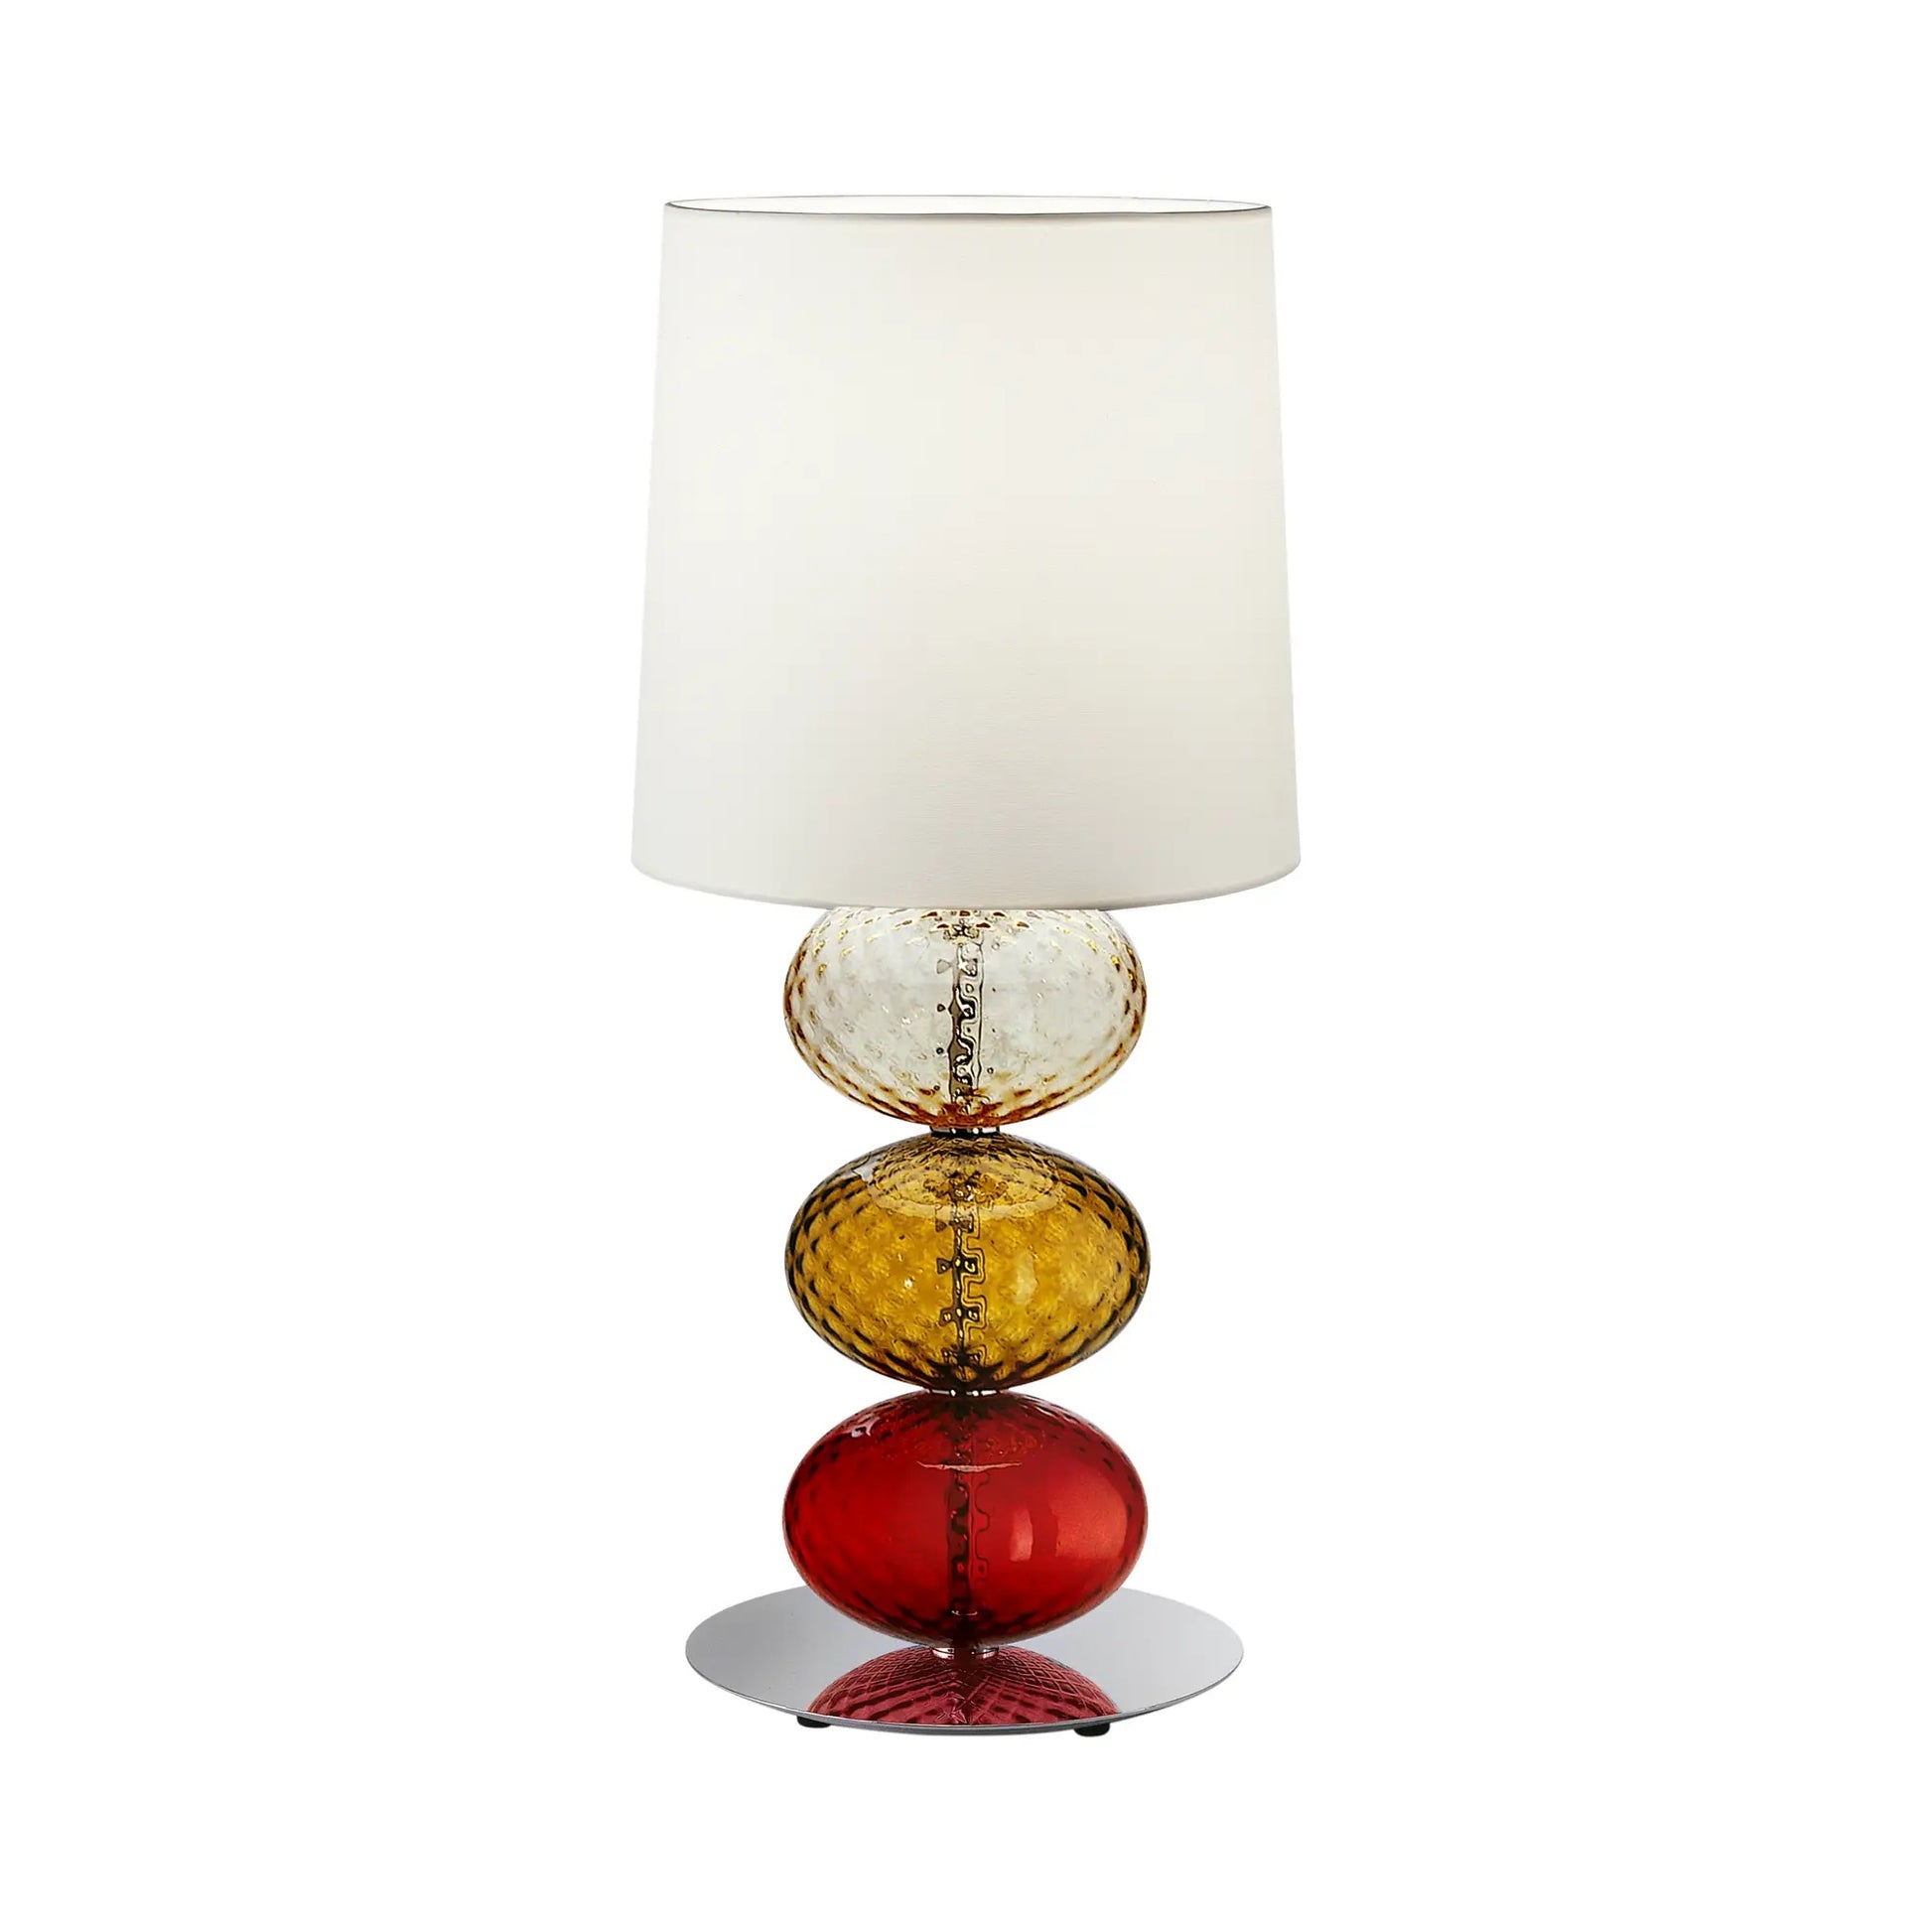 Abat-Jour Lamp by Venini | Stem features spheres capturing light reflections with surface texture from the ancient "balloton" technique | Table lamp adorned with one to three blown glass "balloton" elements in various colors | Base available in chrome-plated or black nickel metal | White fabric lampshade | Home Decor Lighting | 2Jour Concierge, your luxury lifestyle shop